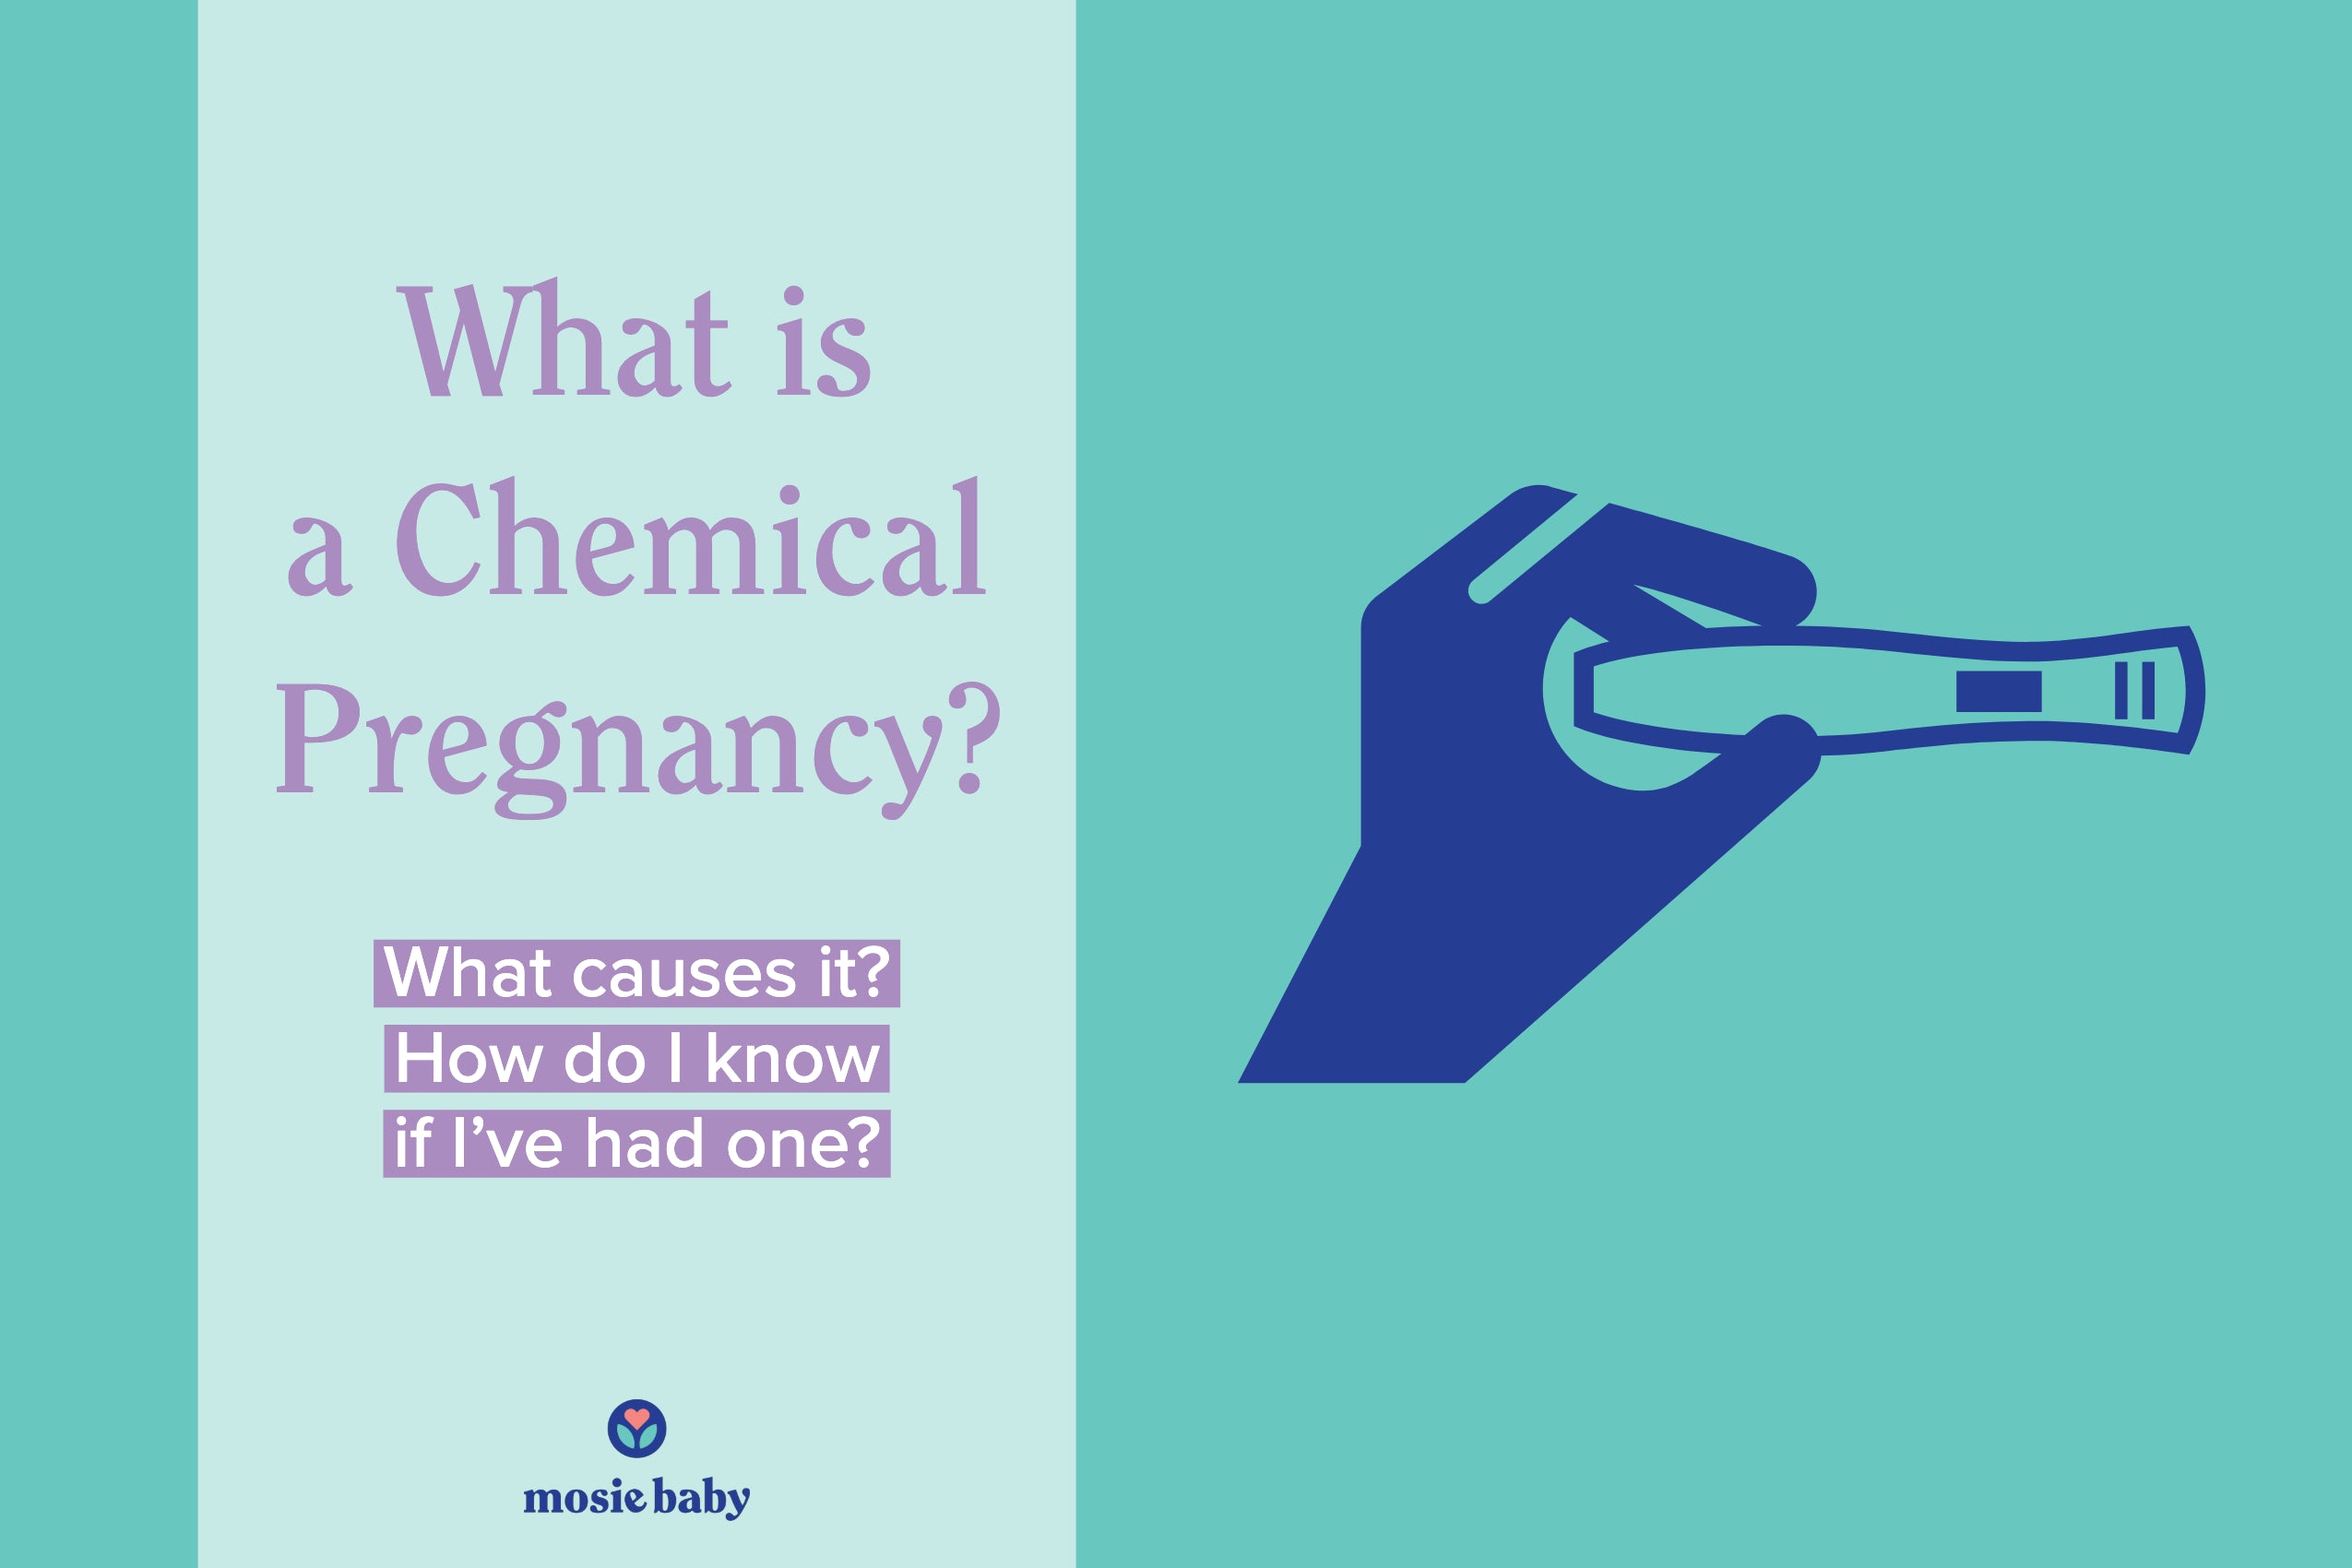 What is a Chemical Pregnancy? How do I know if I've had one? - Mosie Baby